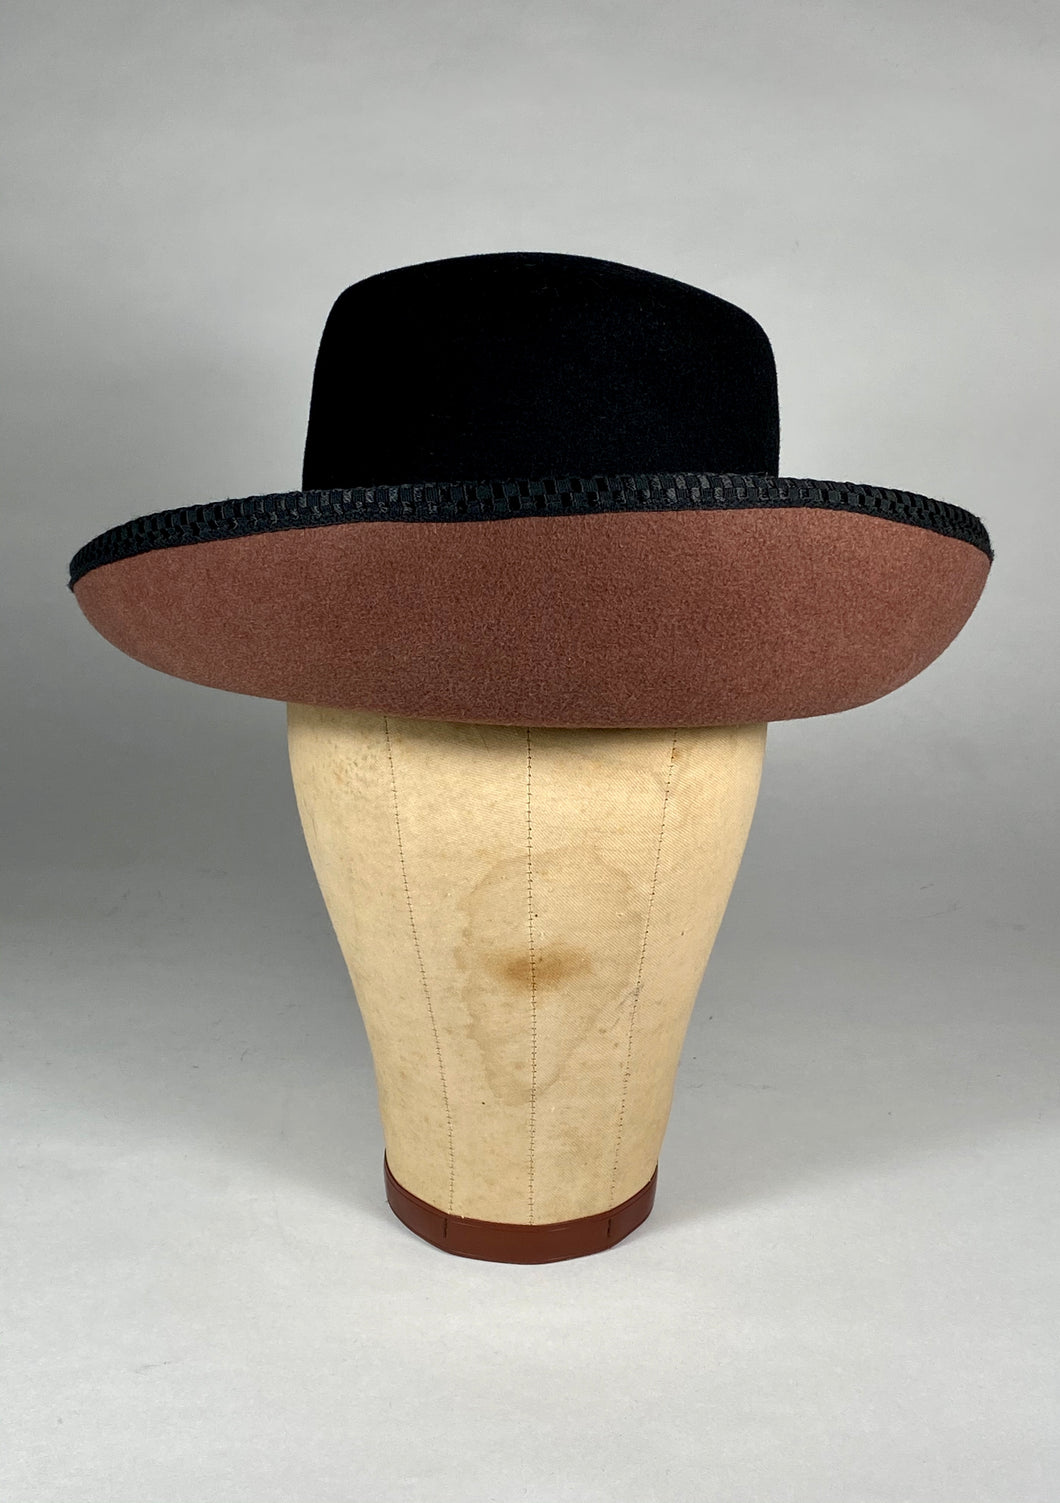 1980’s-90’s designer Kokin wool felt black and brown stylized bowler hat with curl brim